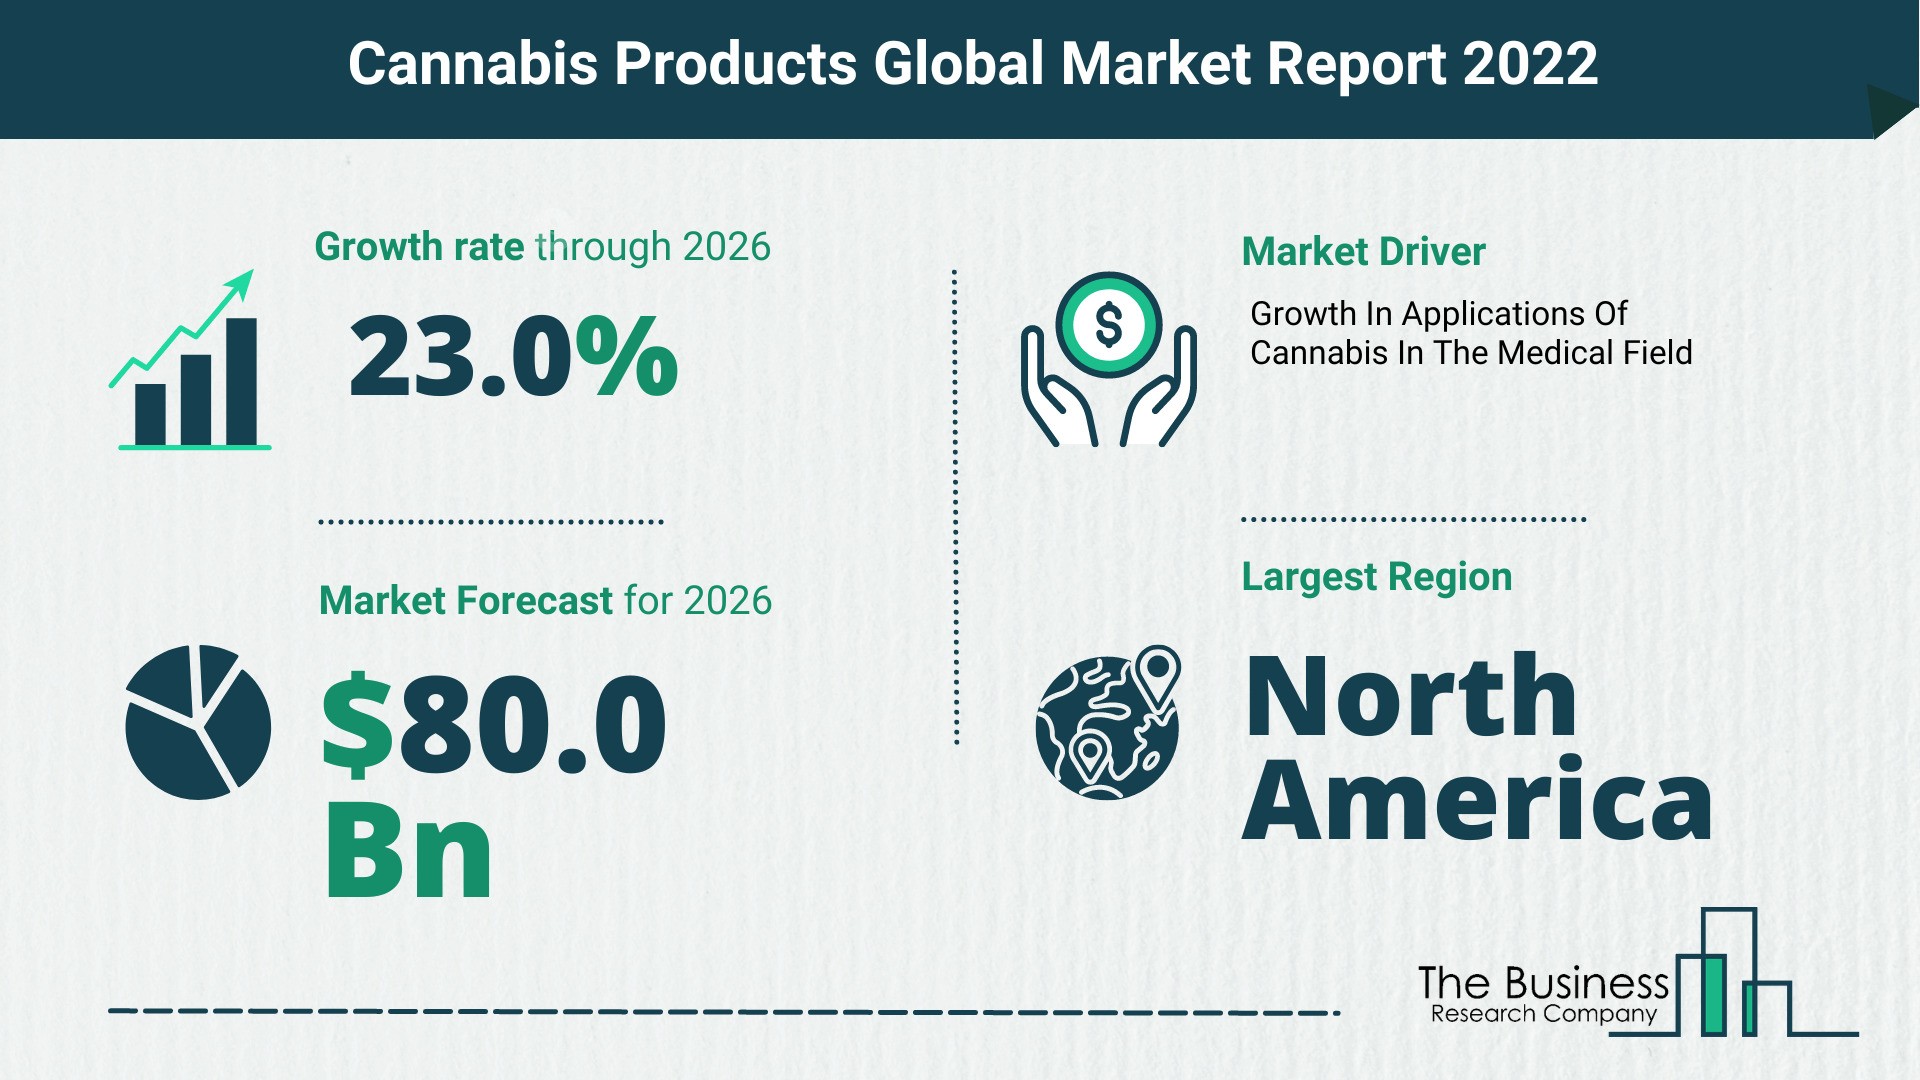 Global Cannabis Products Market